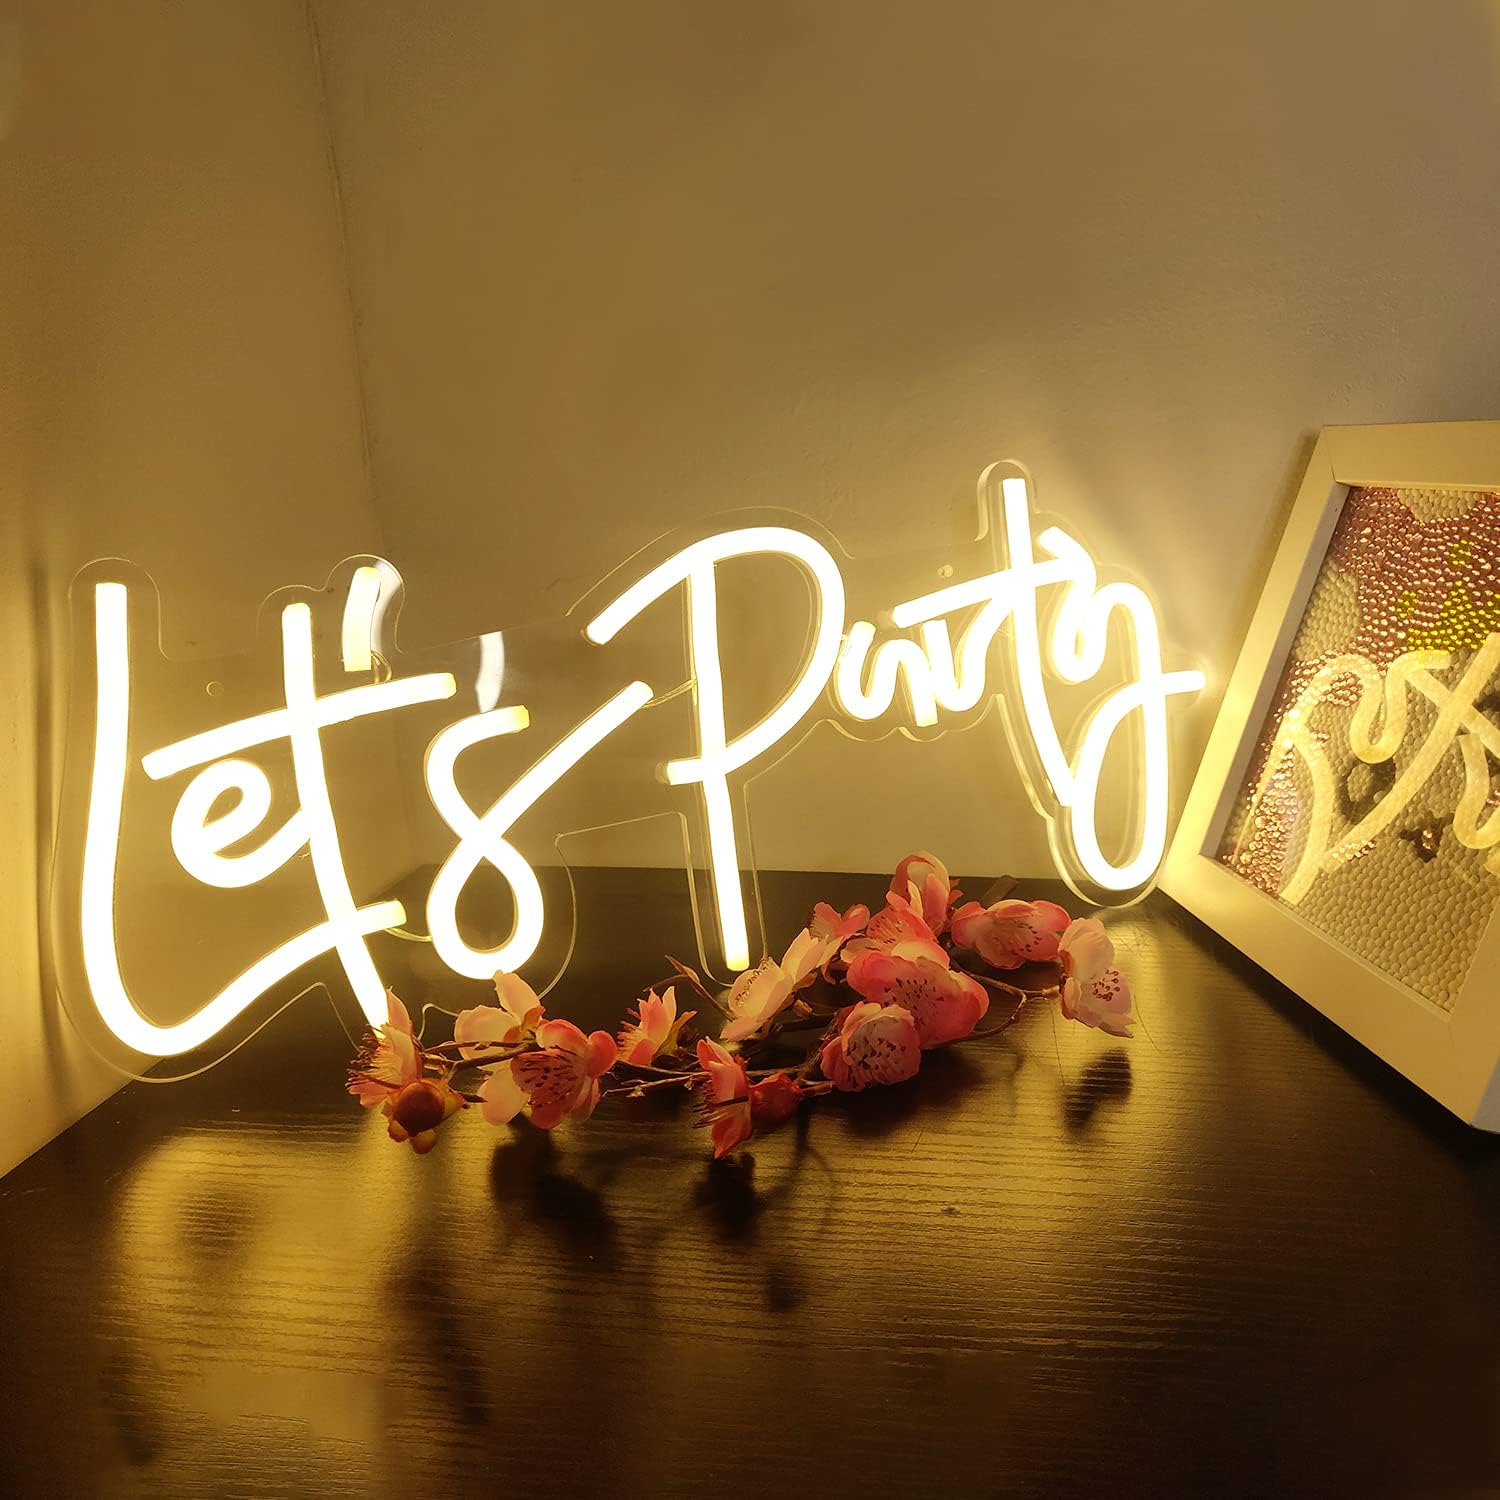 Let's Party Neon Light Sign - Pixilated